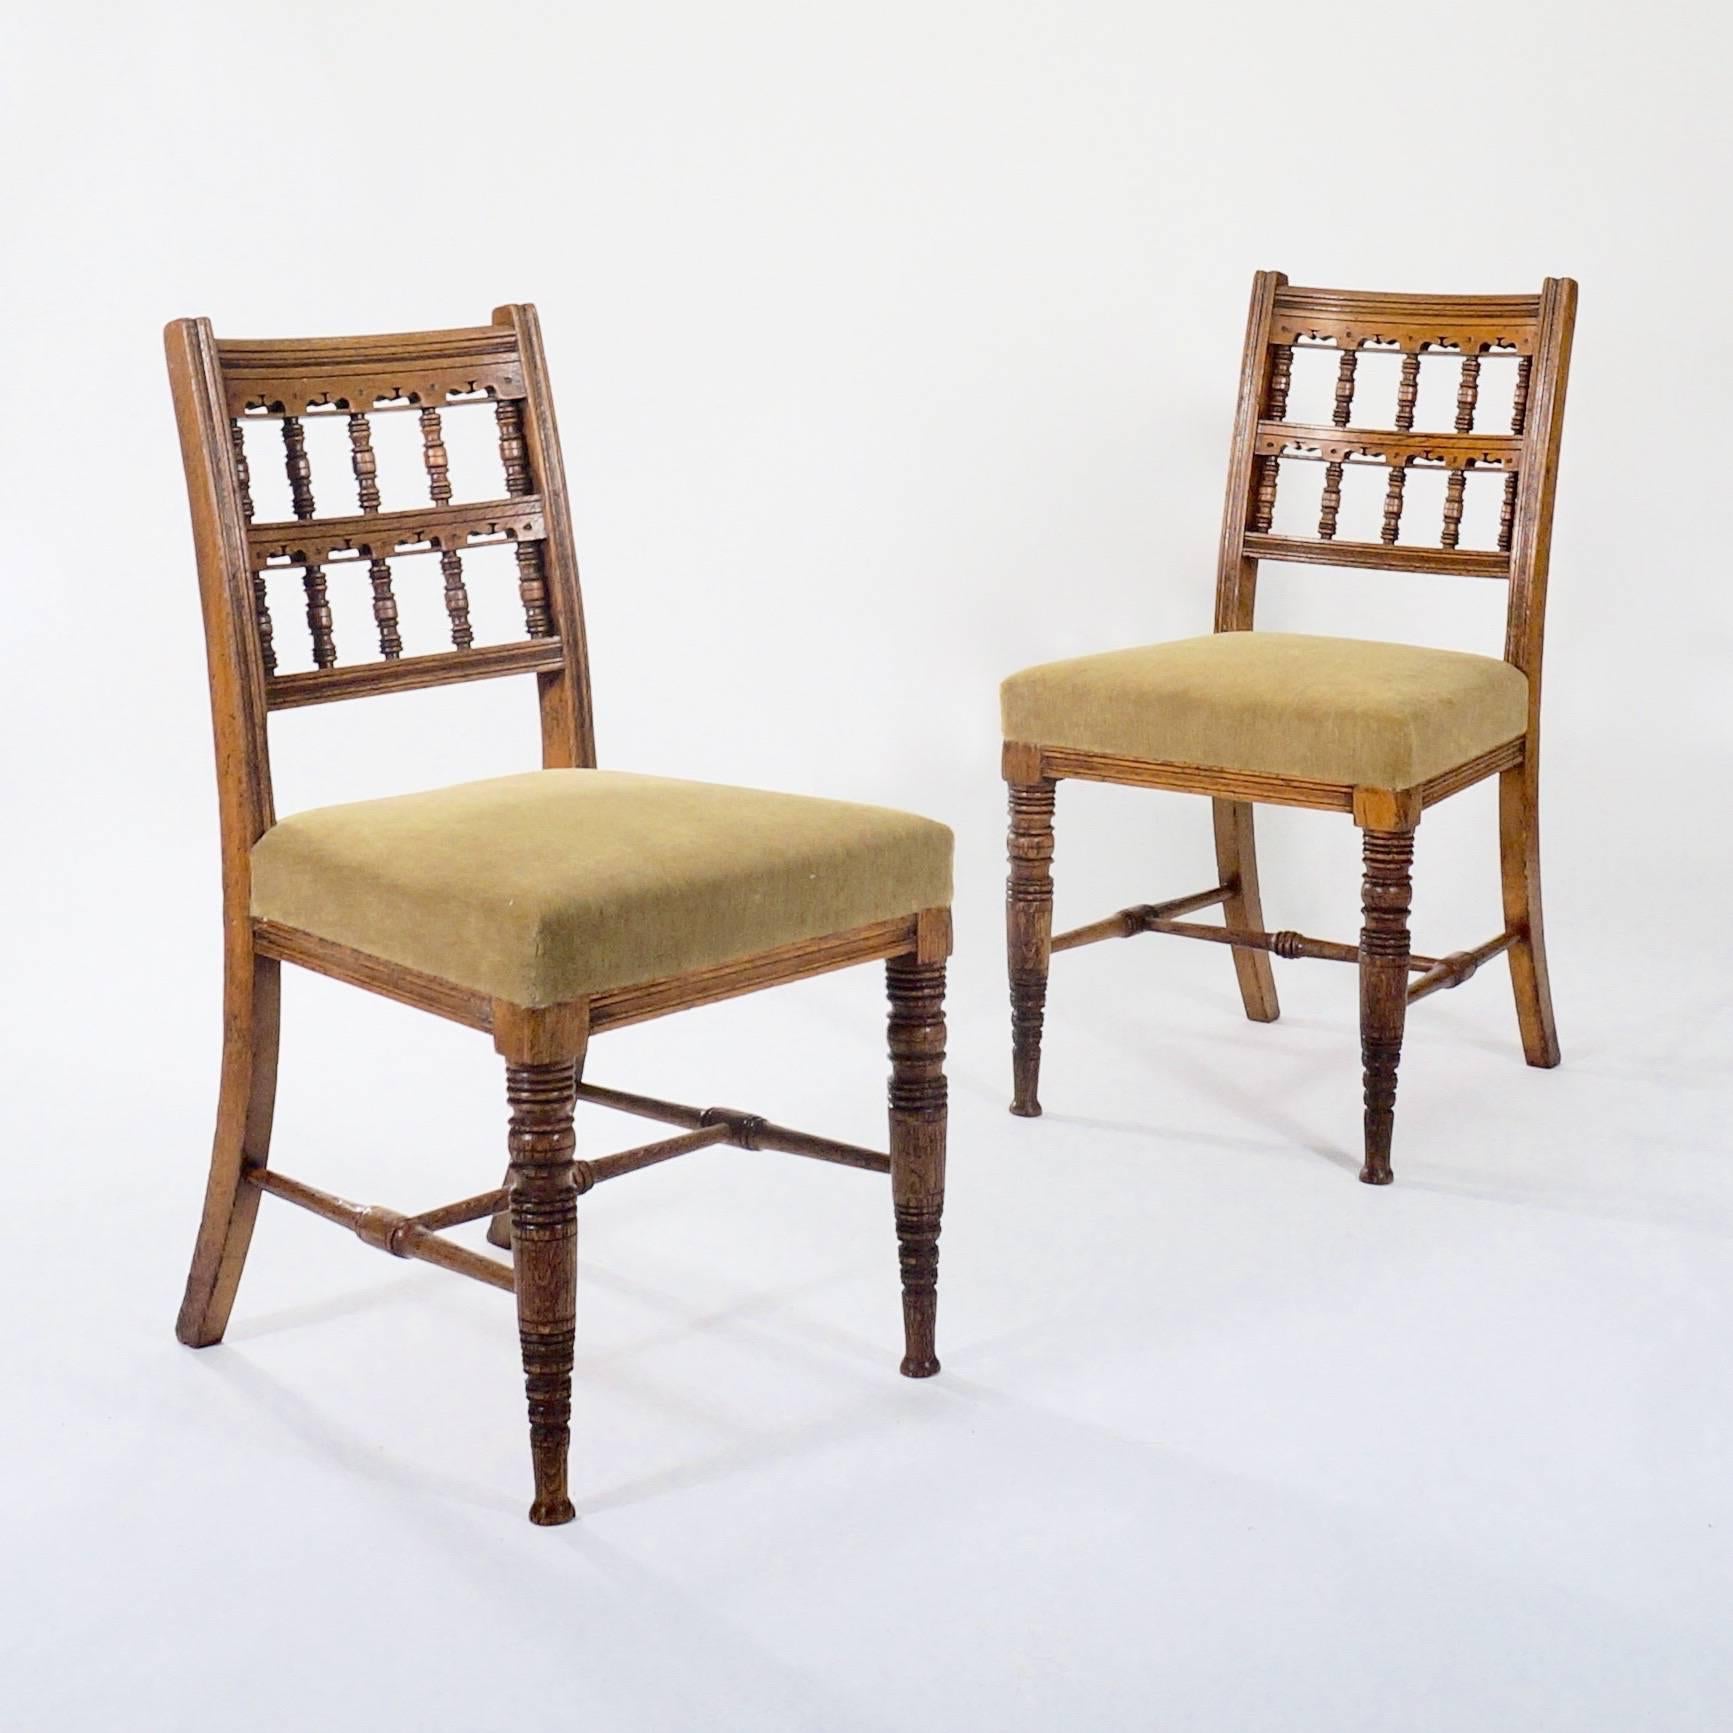 A set of four carved oak side chairs with ring turned supports and upholstered seats.

Probably manufactured by Gillows.

England, circa 1880.